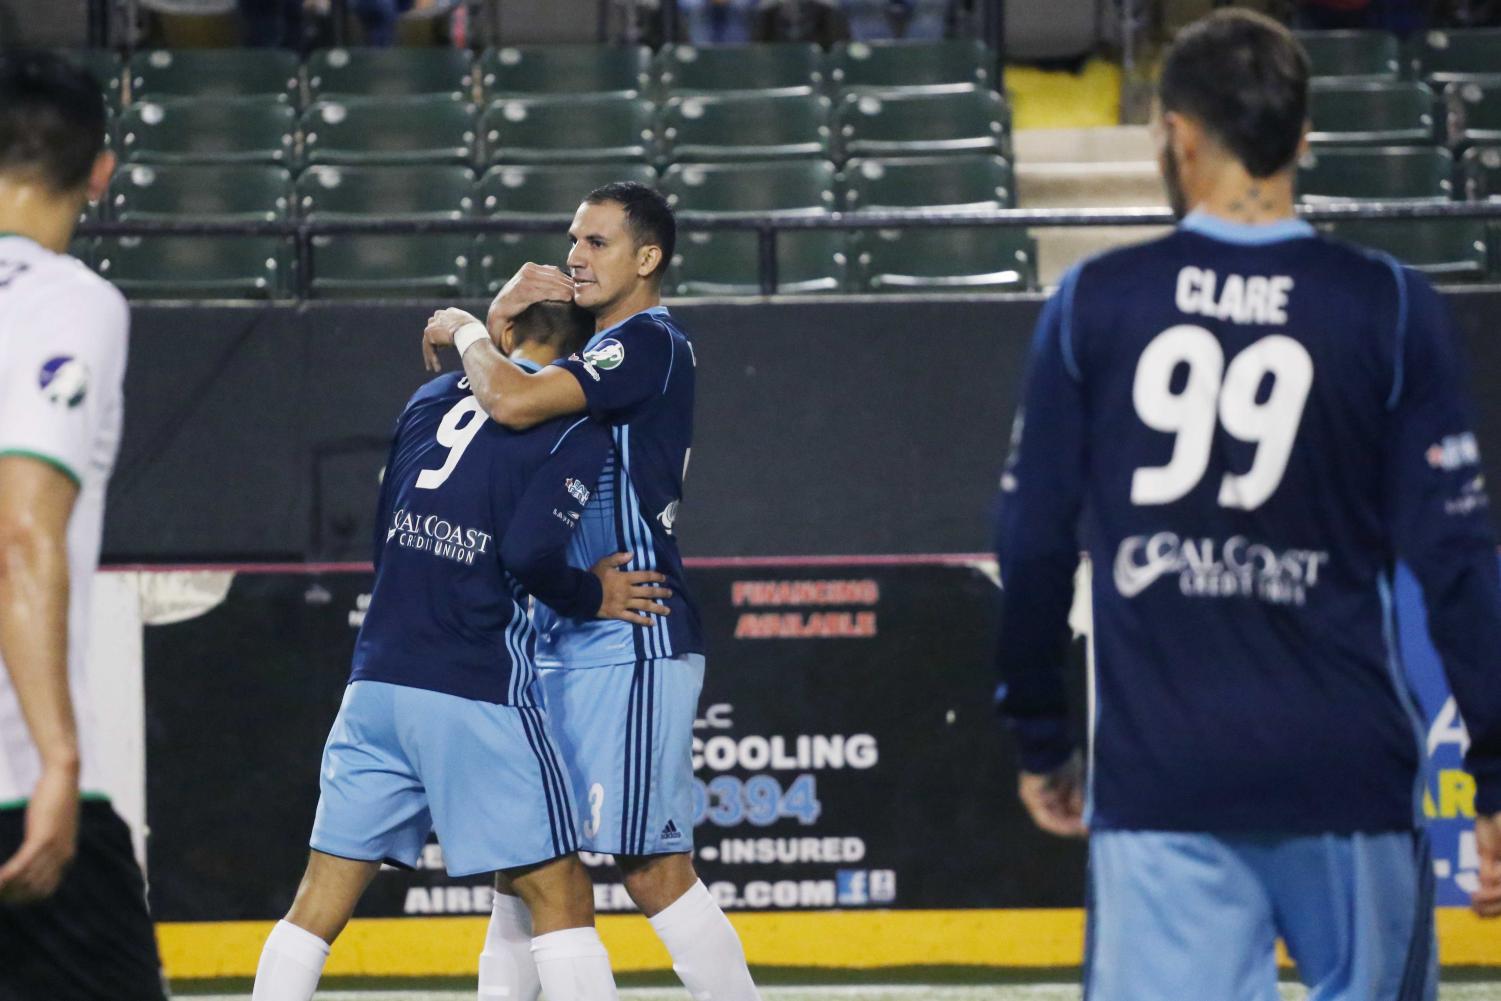 Coyotes+fall+to+Sockers+9-5+after+securing+first+franchise+win